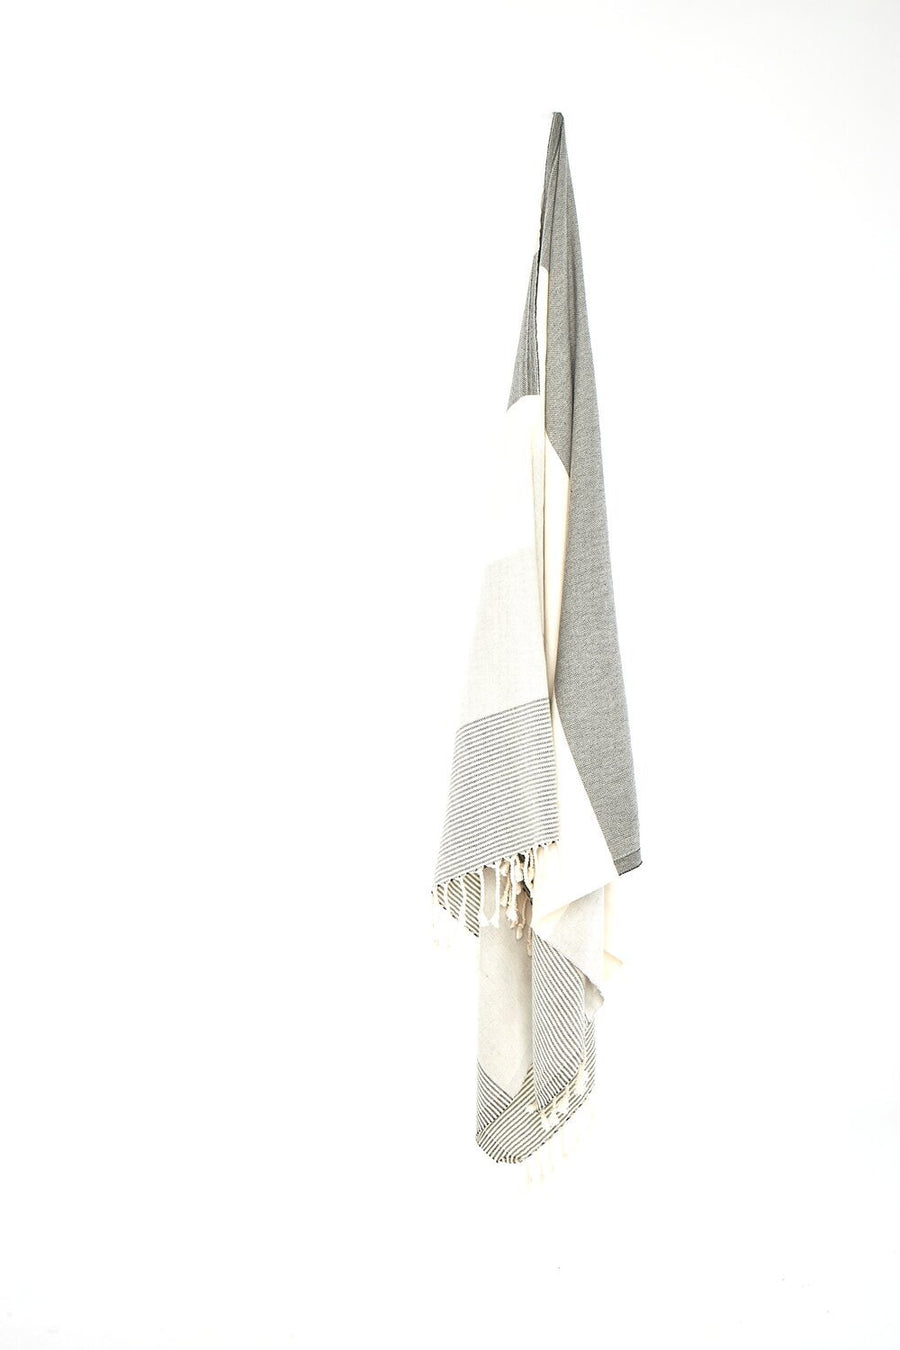 Ozoola Johnny Turkish beach towel in natural hanging